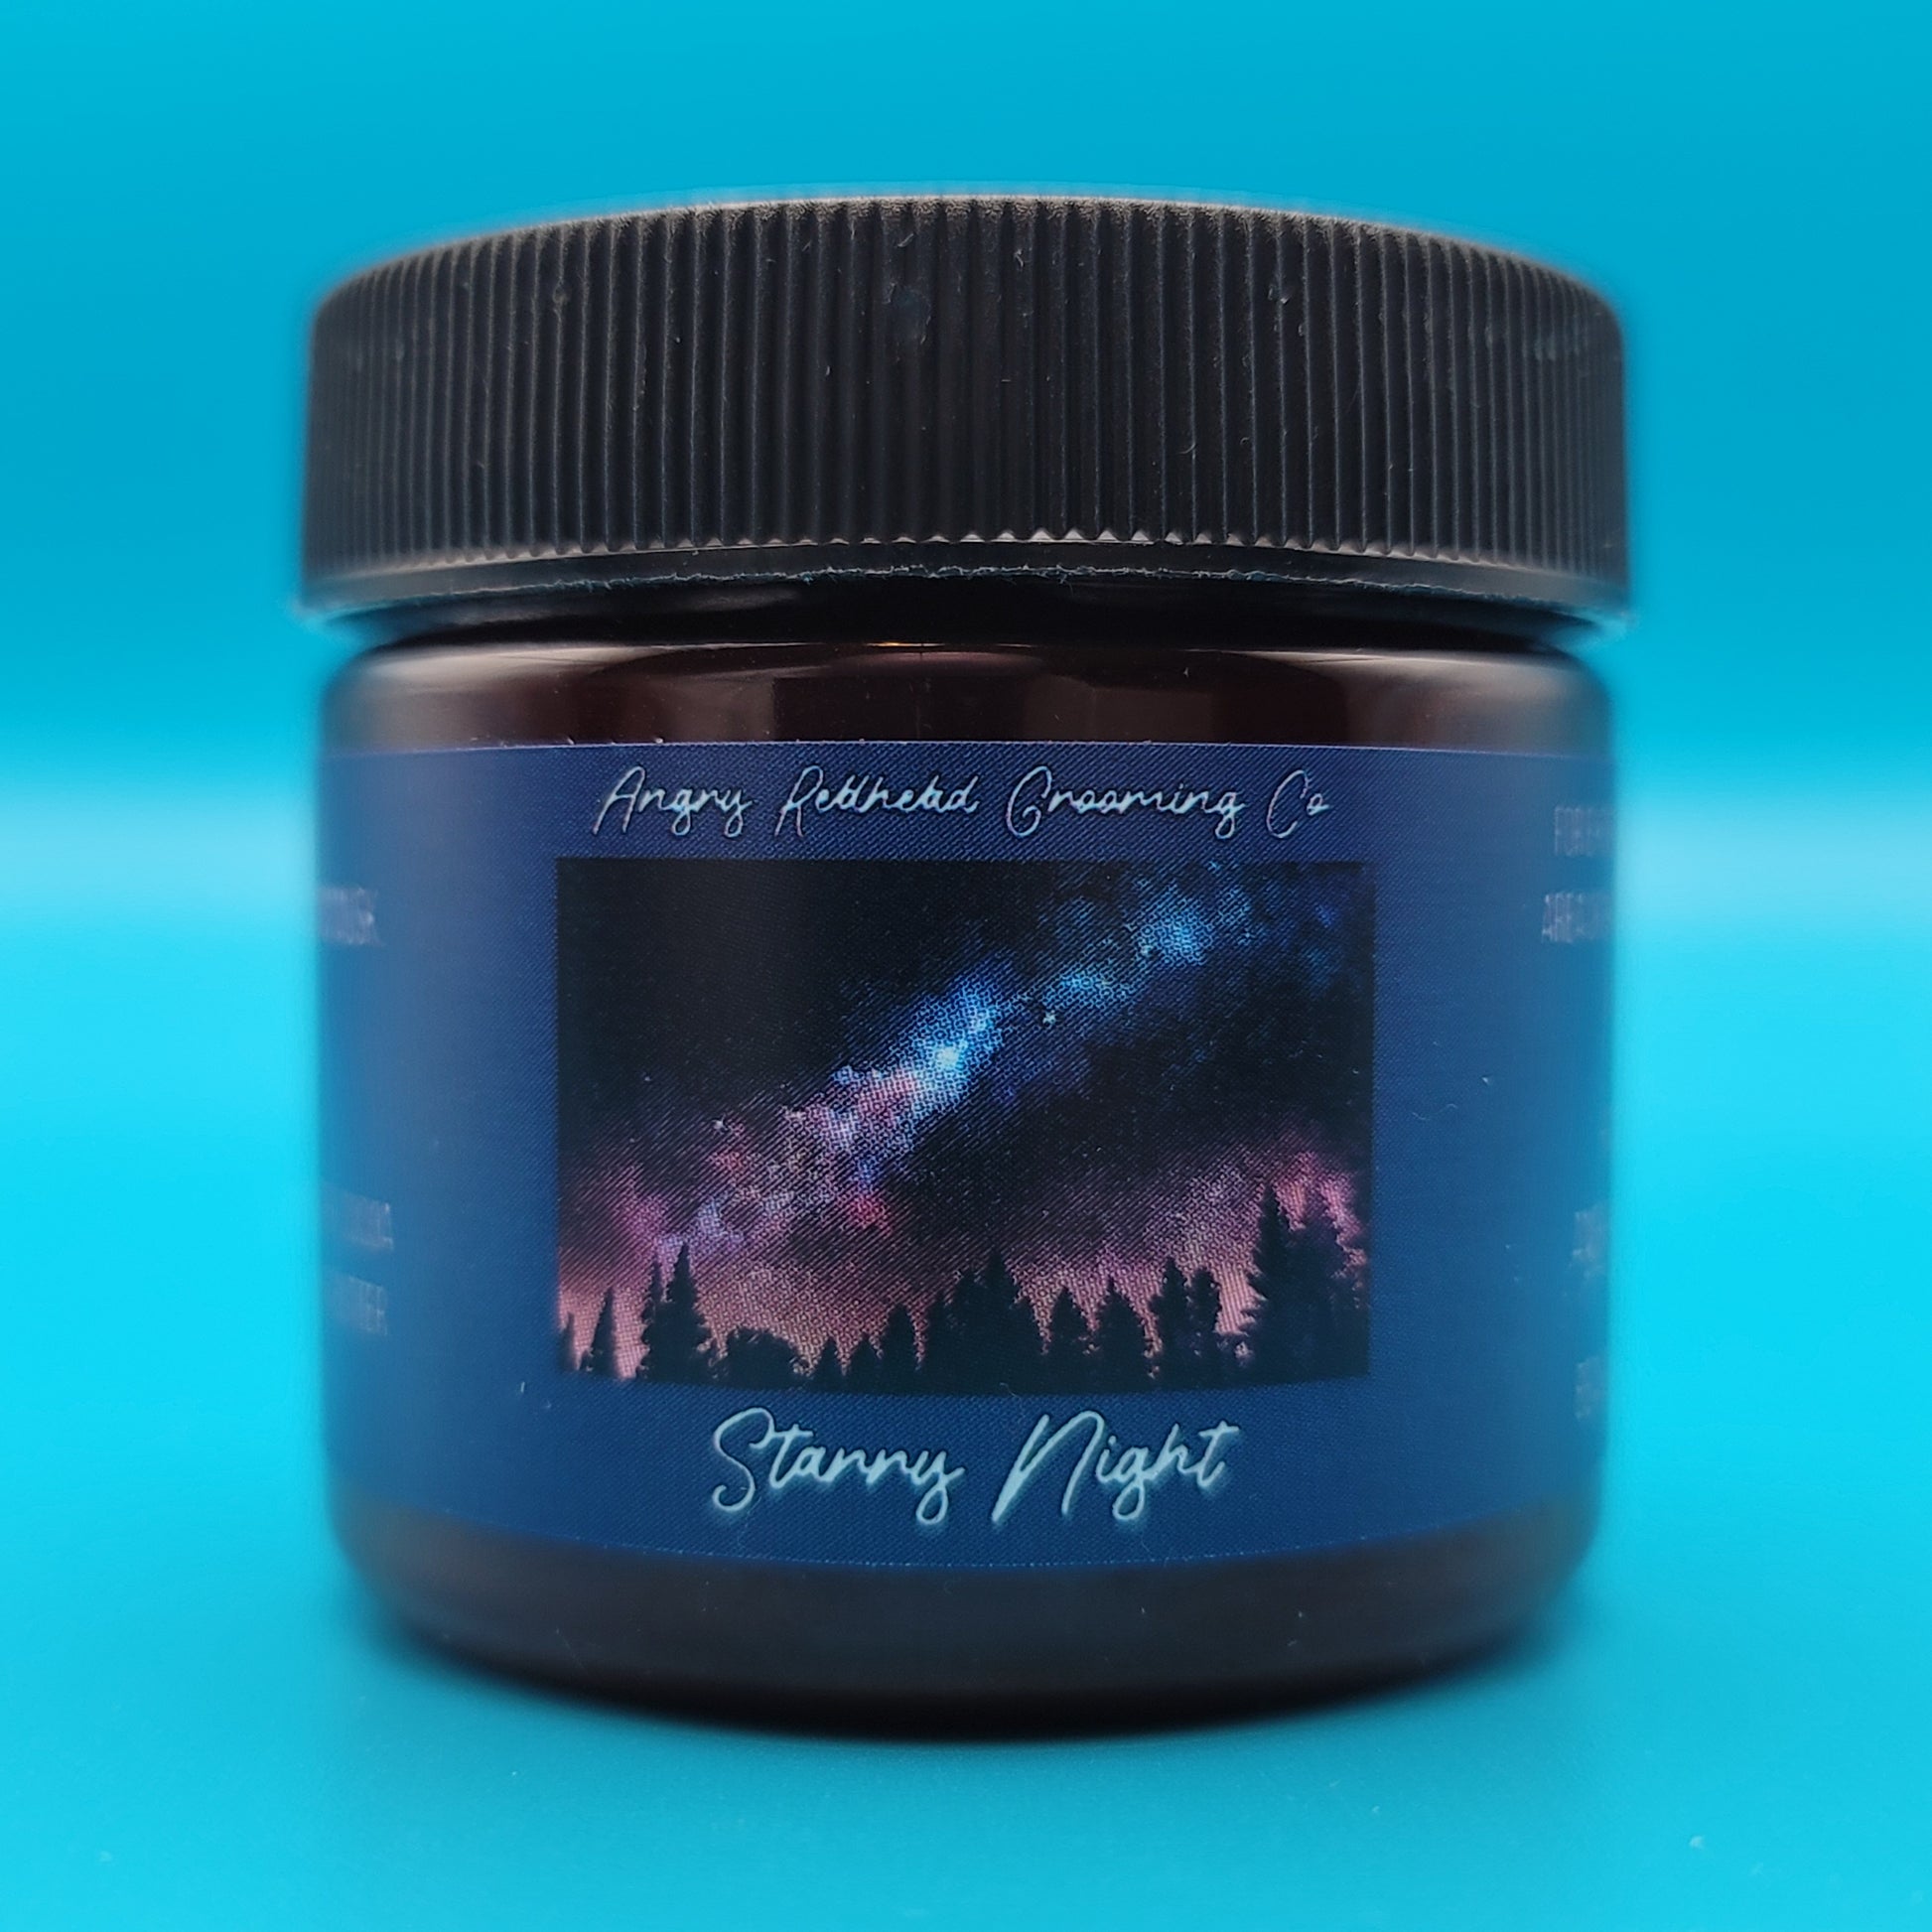 Starry Night Beard Butter by Angry Redhead Grooming Co - angryredheadgrooming.com